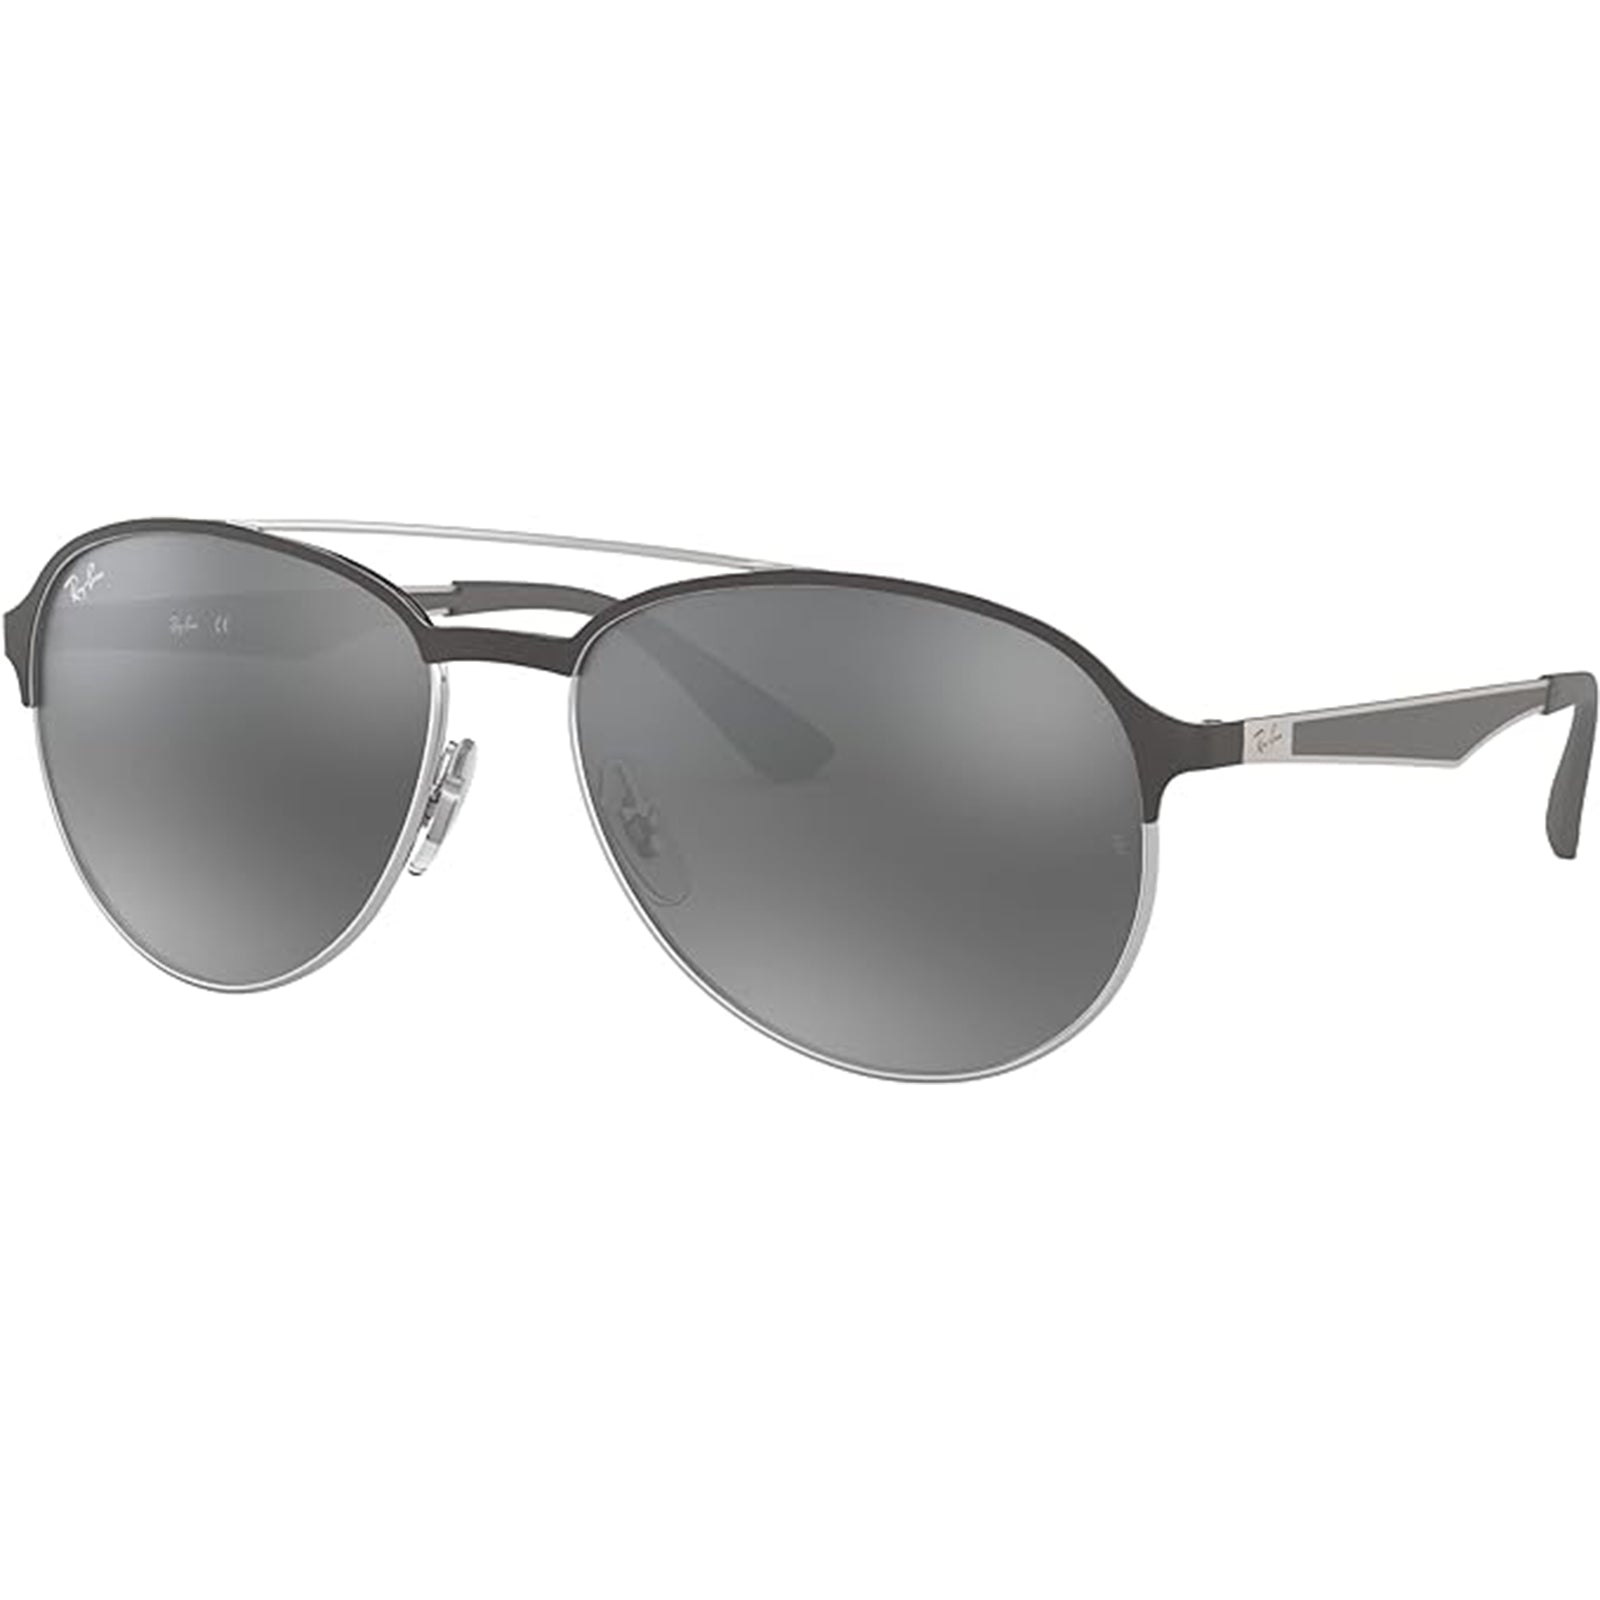 Ray-Ban RB3606 Men's Lifestyle Sunglasses-0RB3606